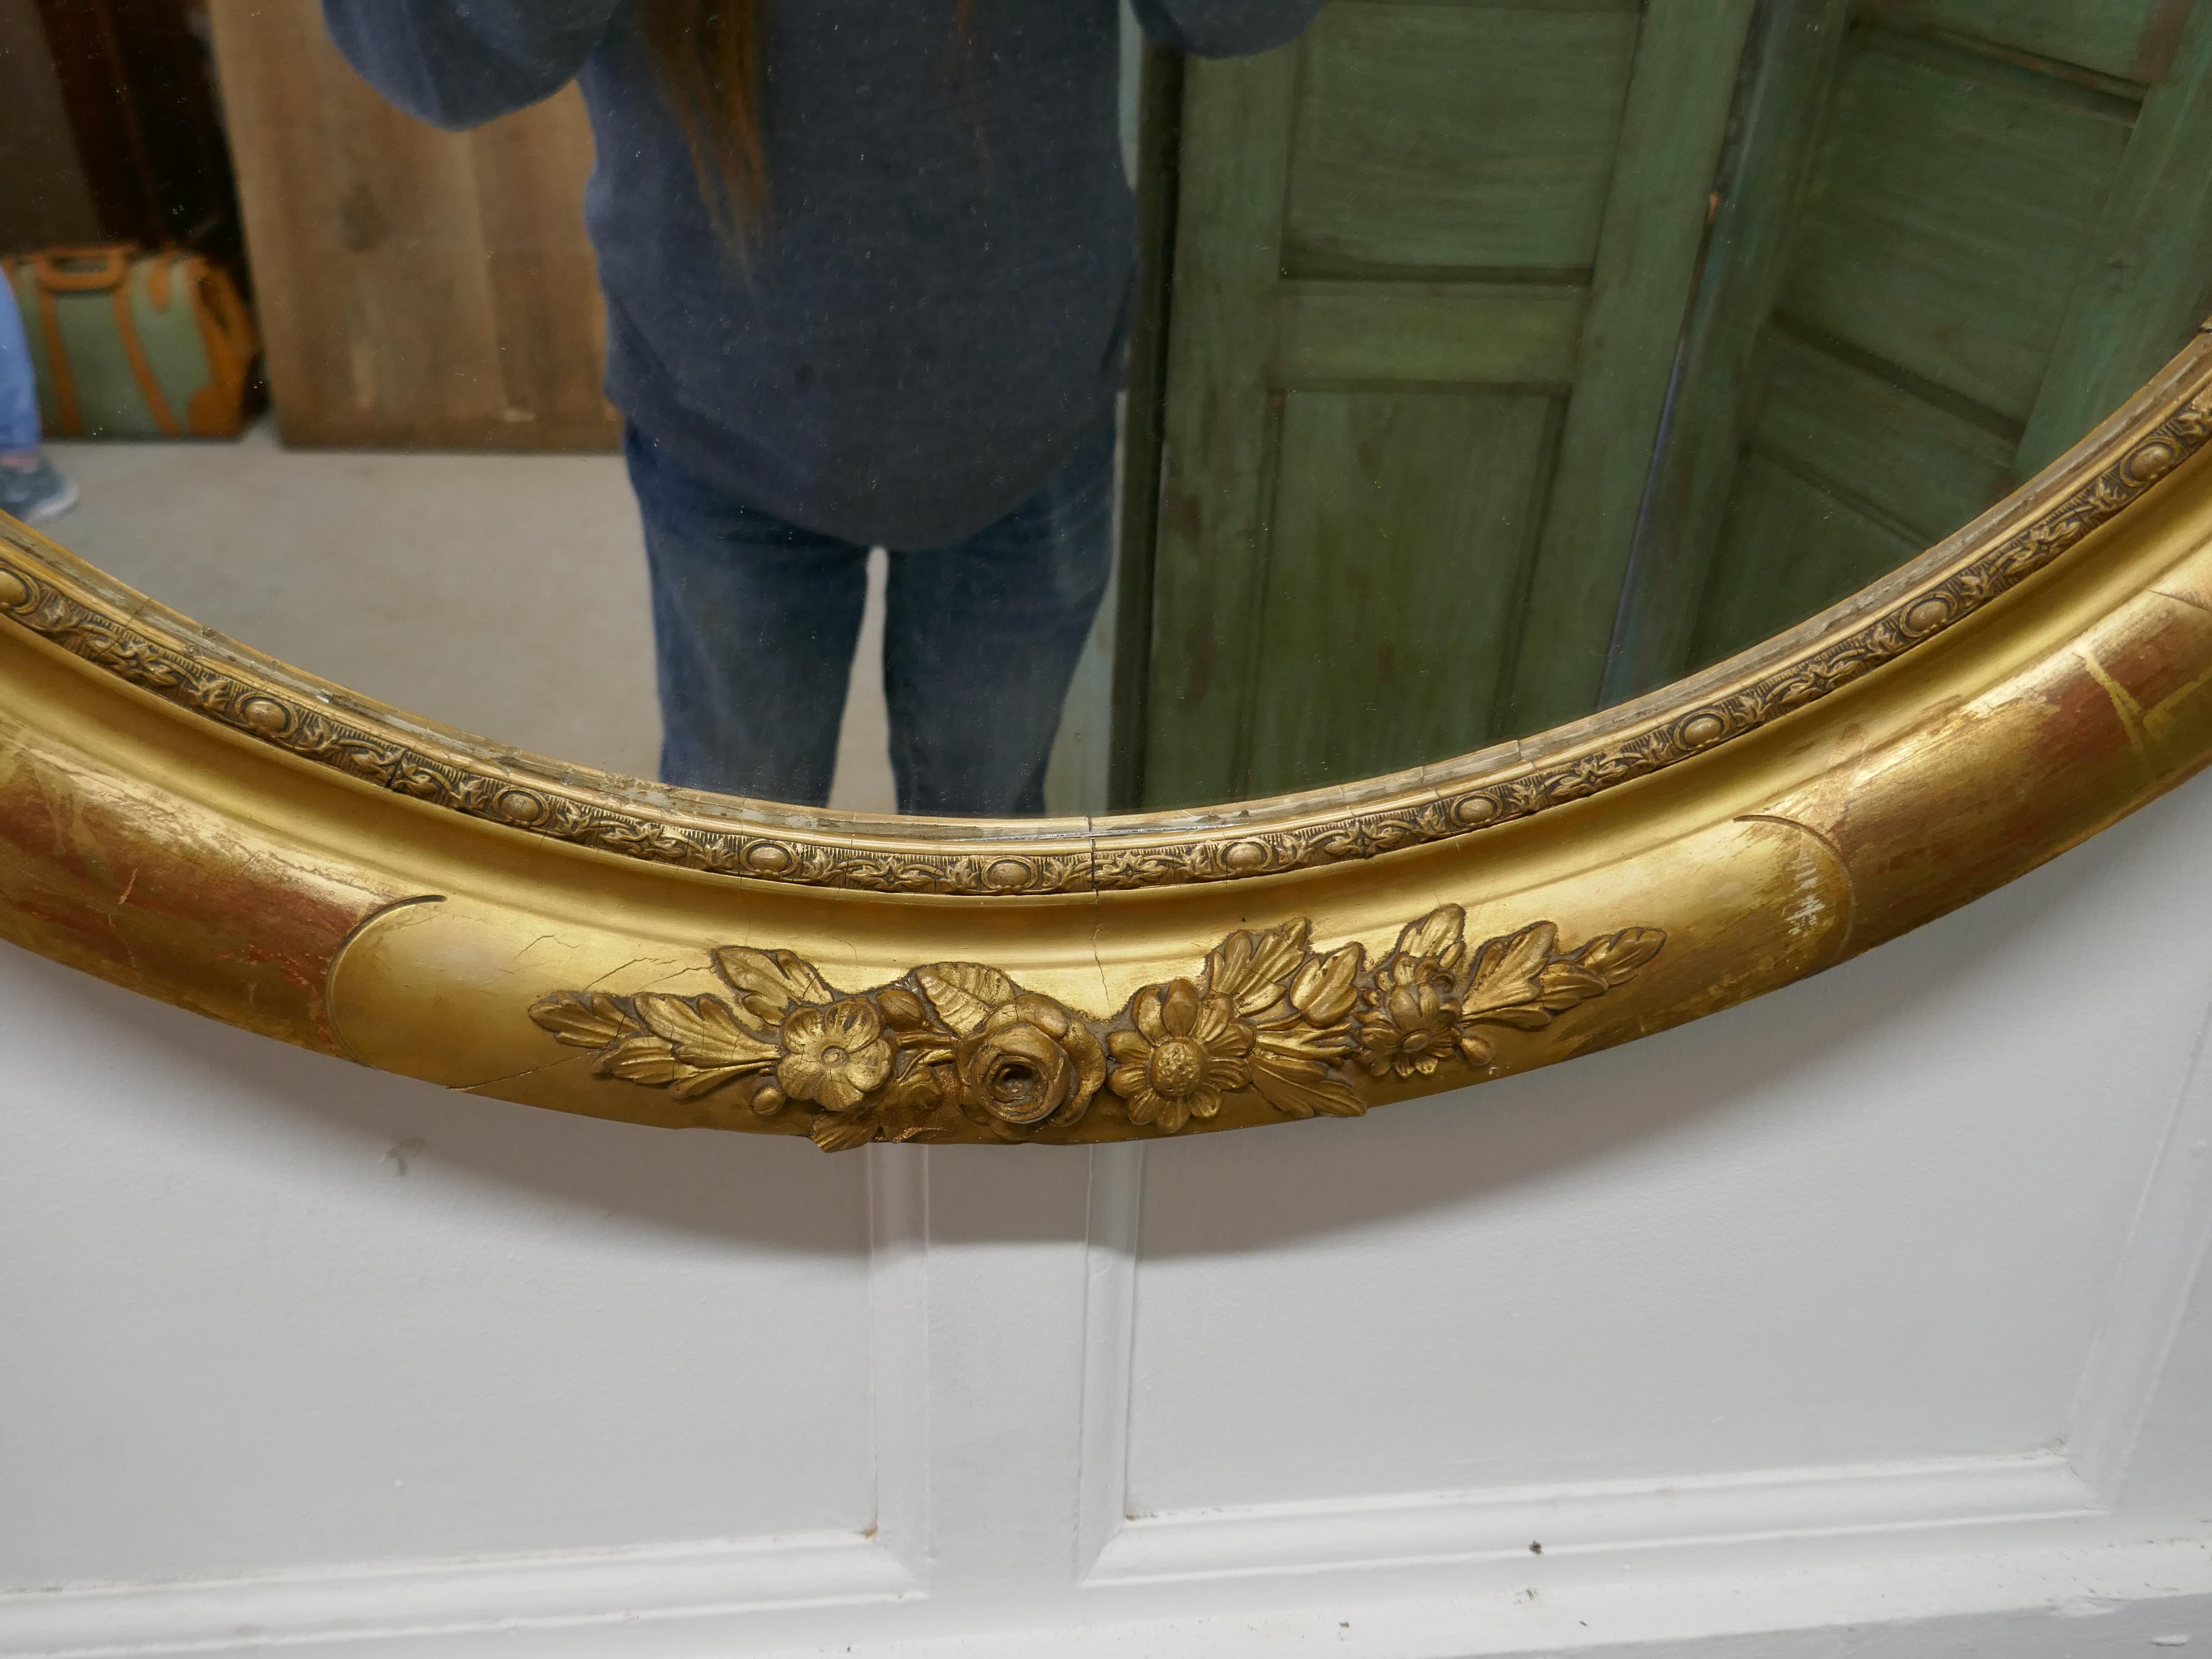 A large French Rococo oval gilt wall mirror

The mirror has a very attractive 3.5” wide gilt frame in the Rococo style, it is decorated with many flowers. In the border the red oxide undercoat is peeping through giving the piece a luxurious if